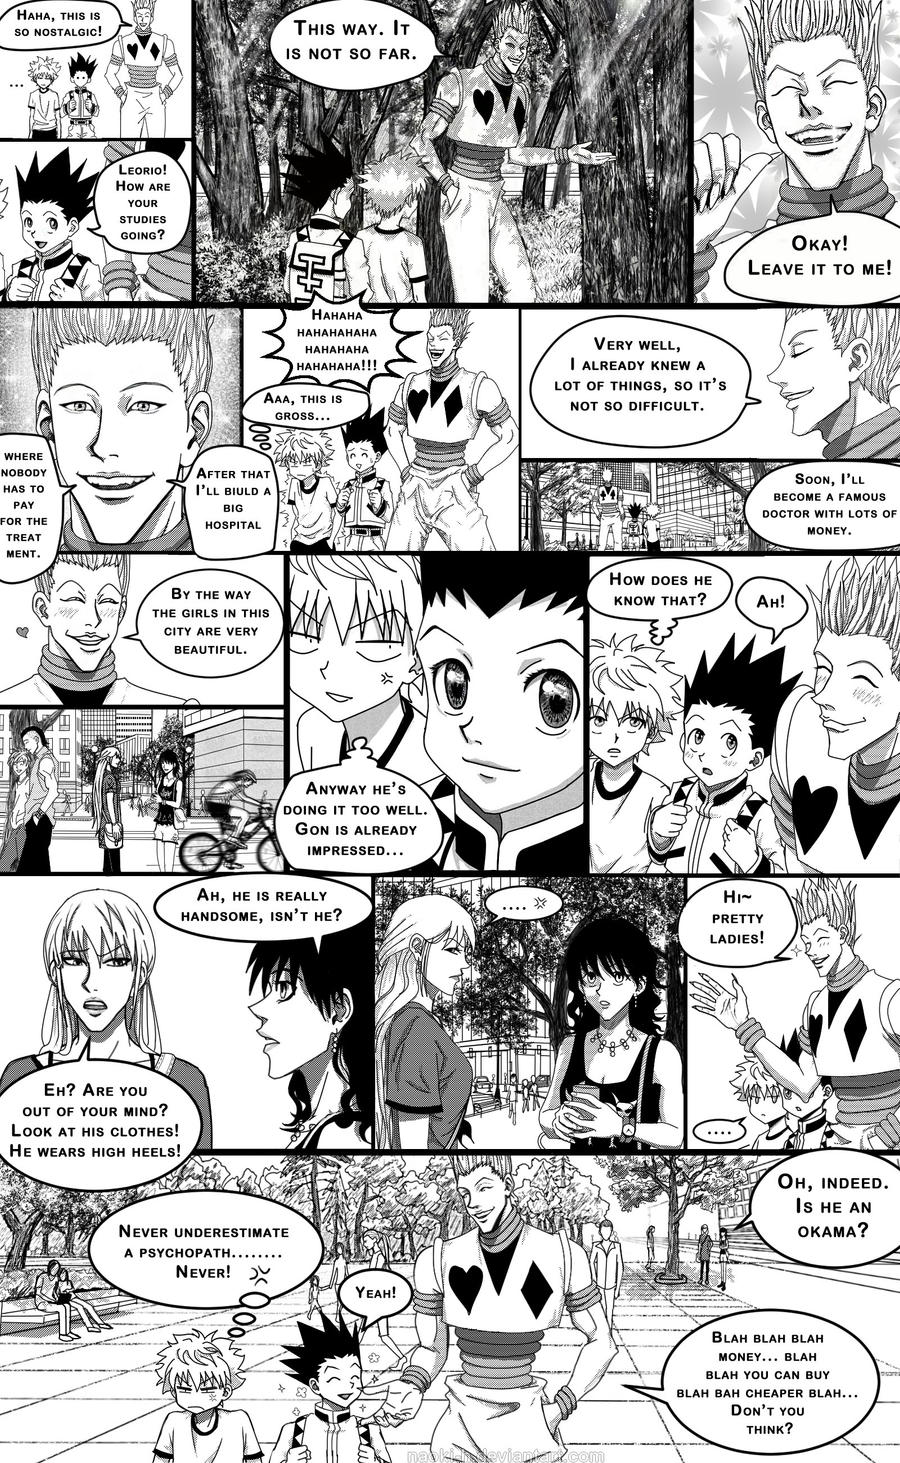 A miracle smile - PAGE 1 by RunStrayWolf on DeviantArt